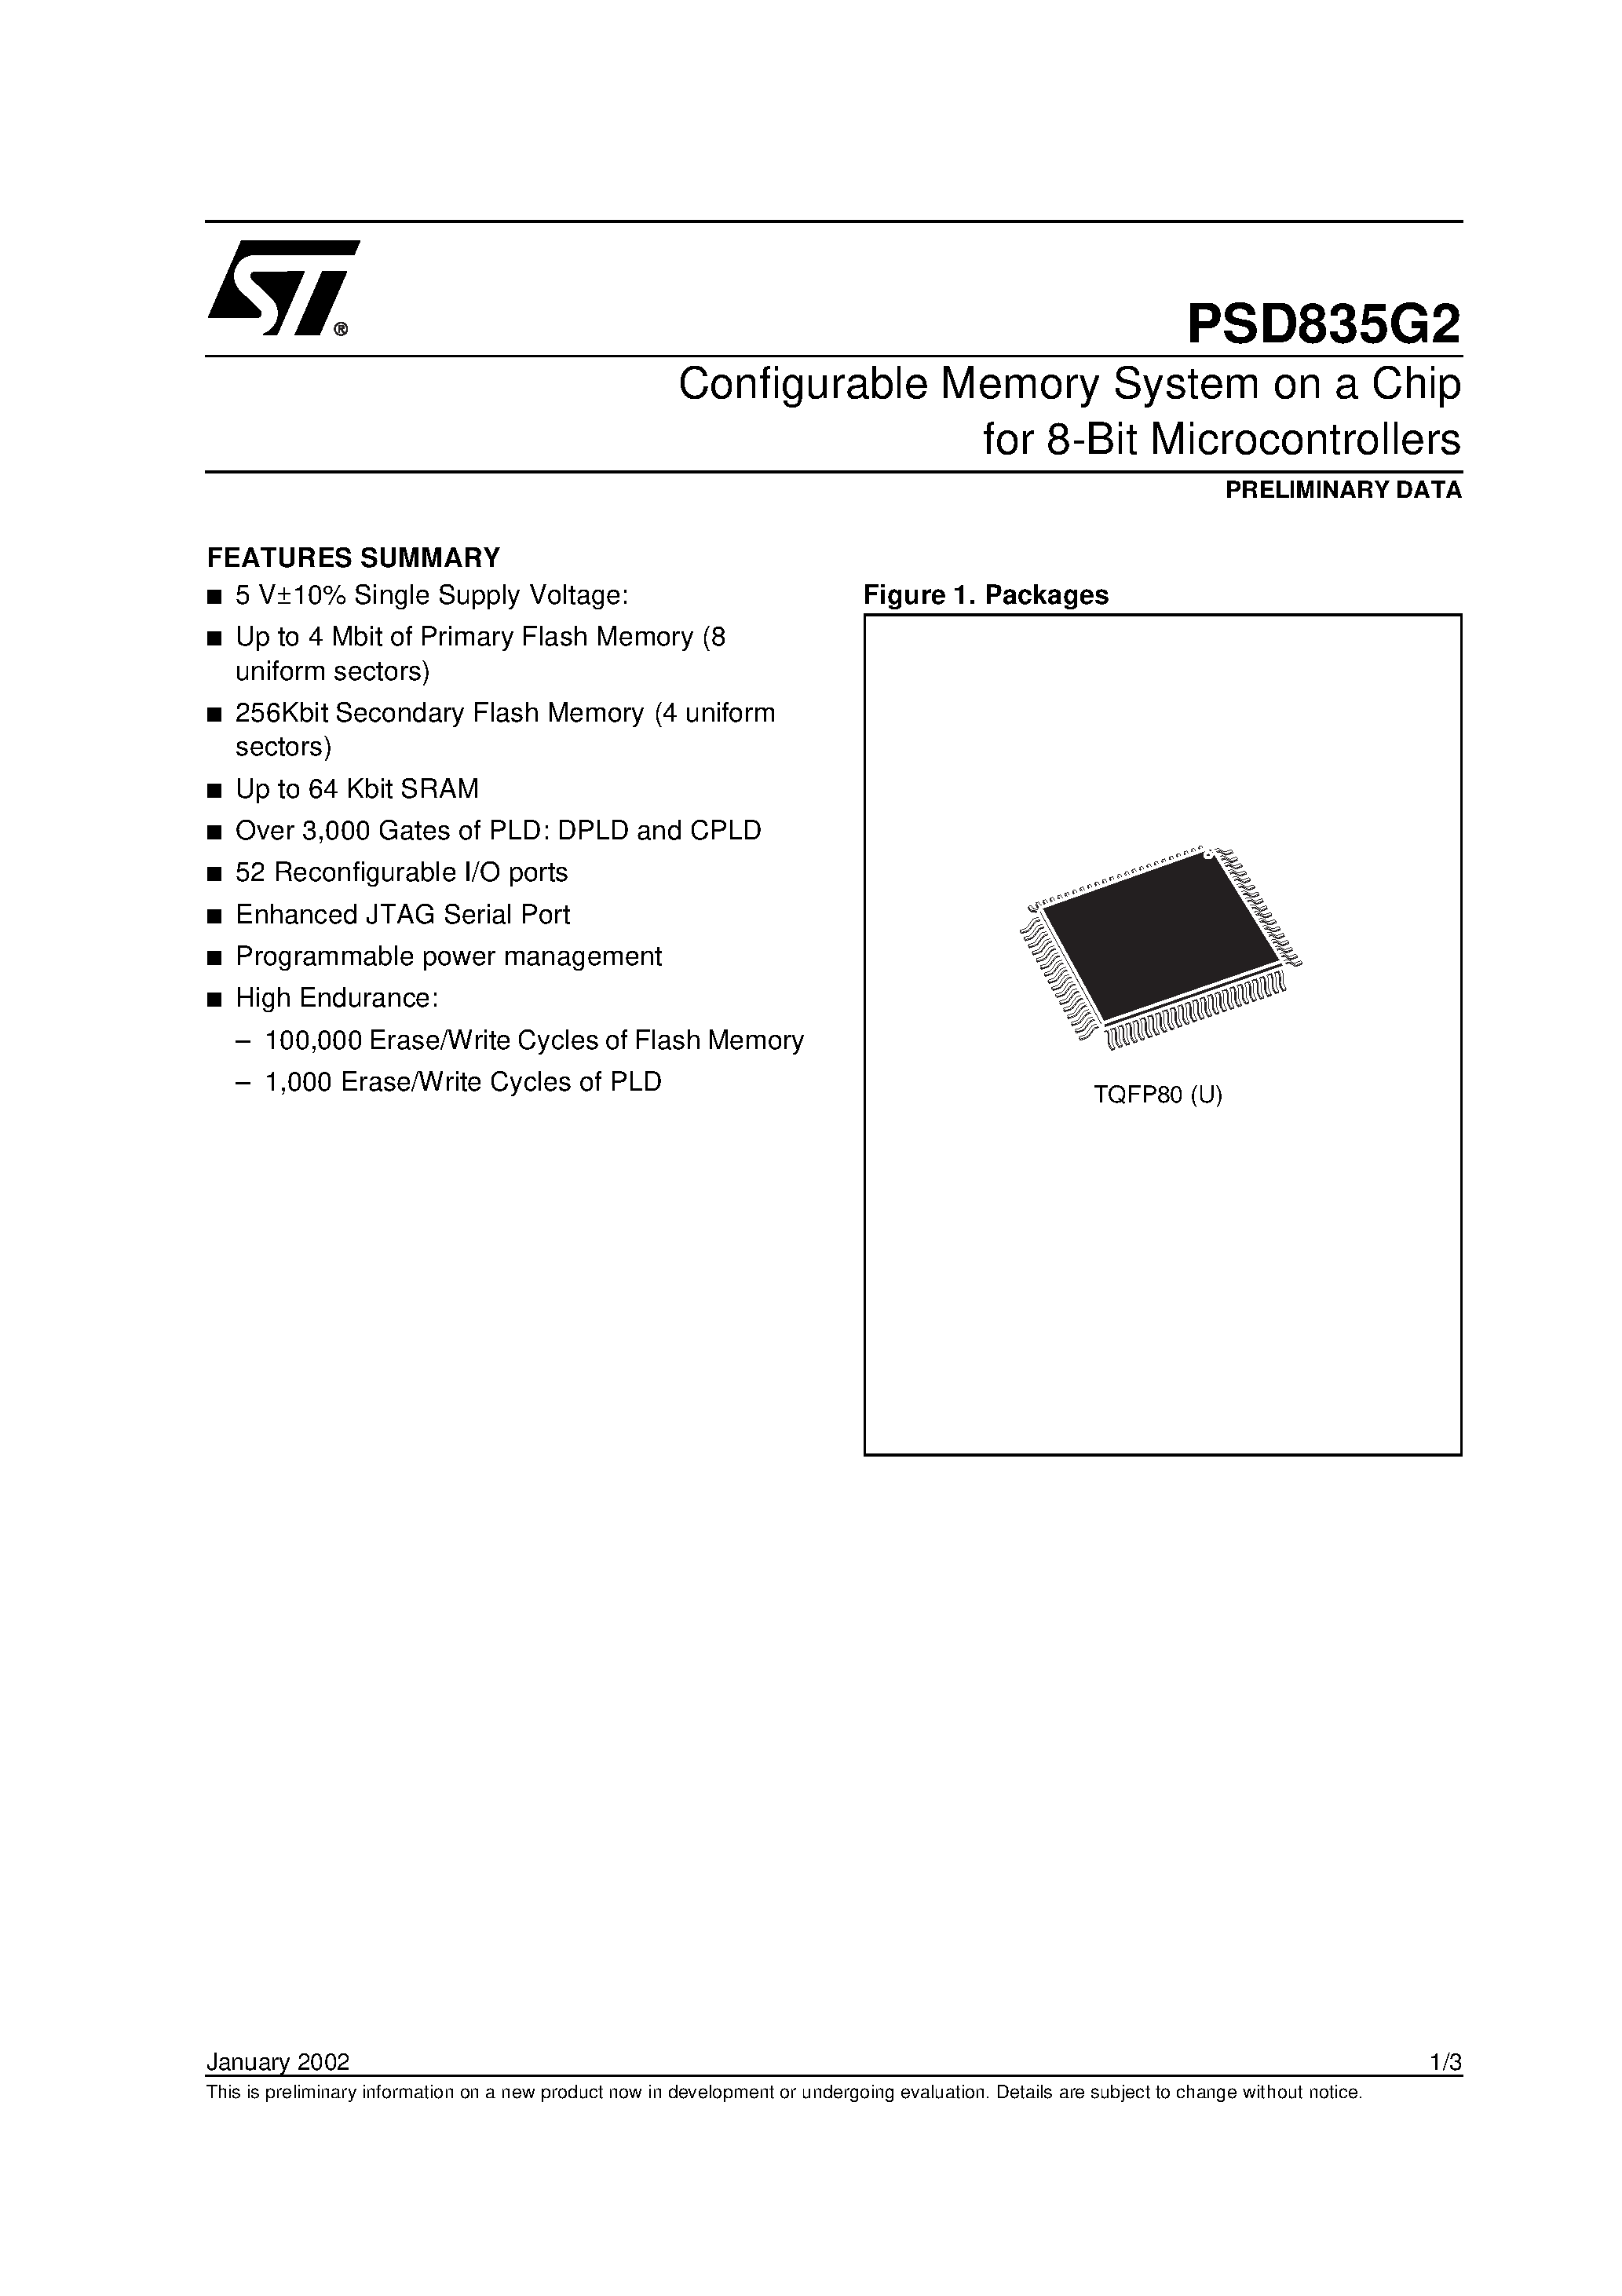 Datasheet PSD835F1V-A-12U - Configurable Memory System on a Chip for 8-Bit Microcontrollers page 1